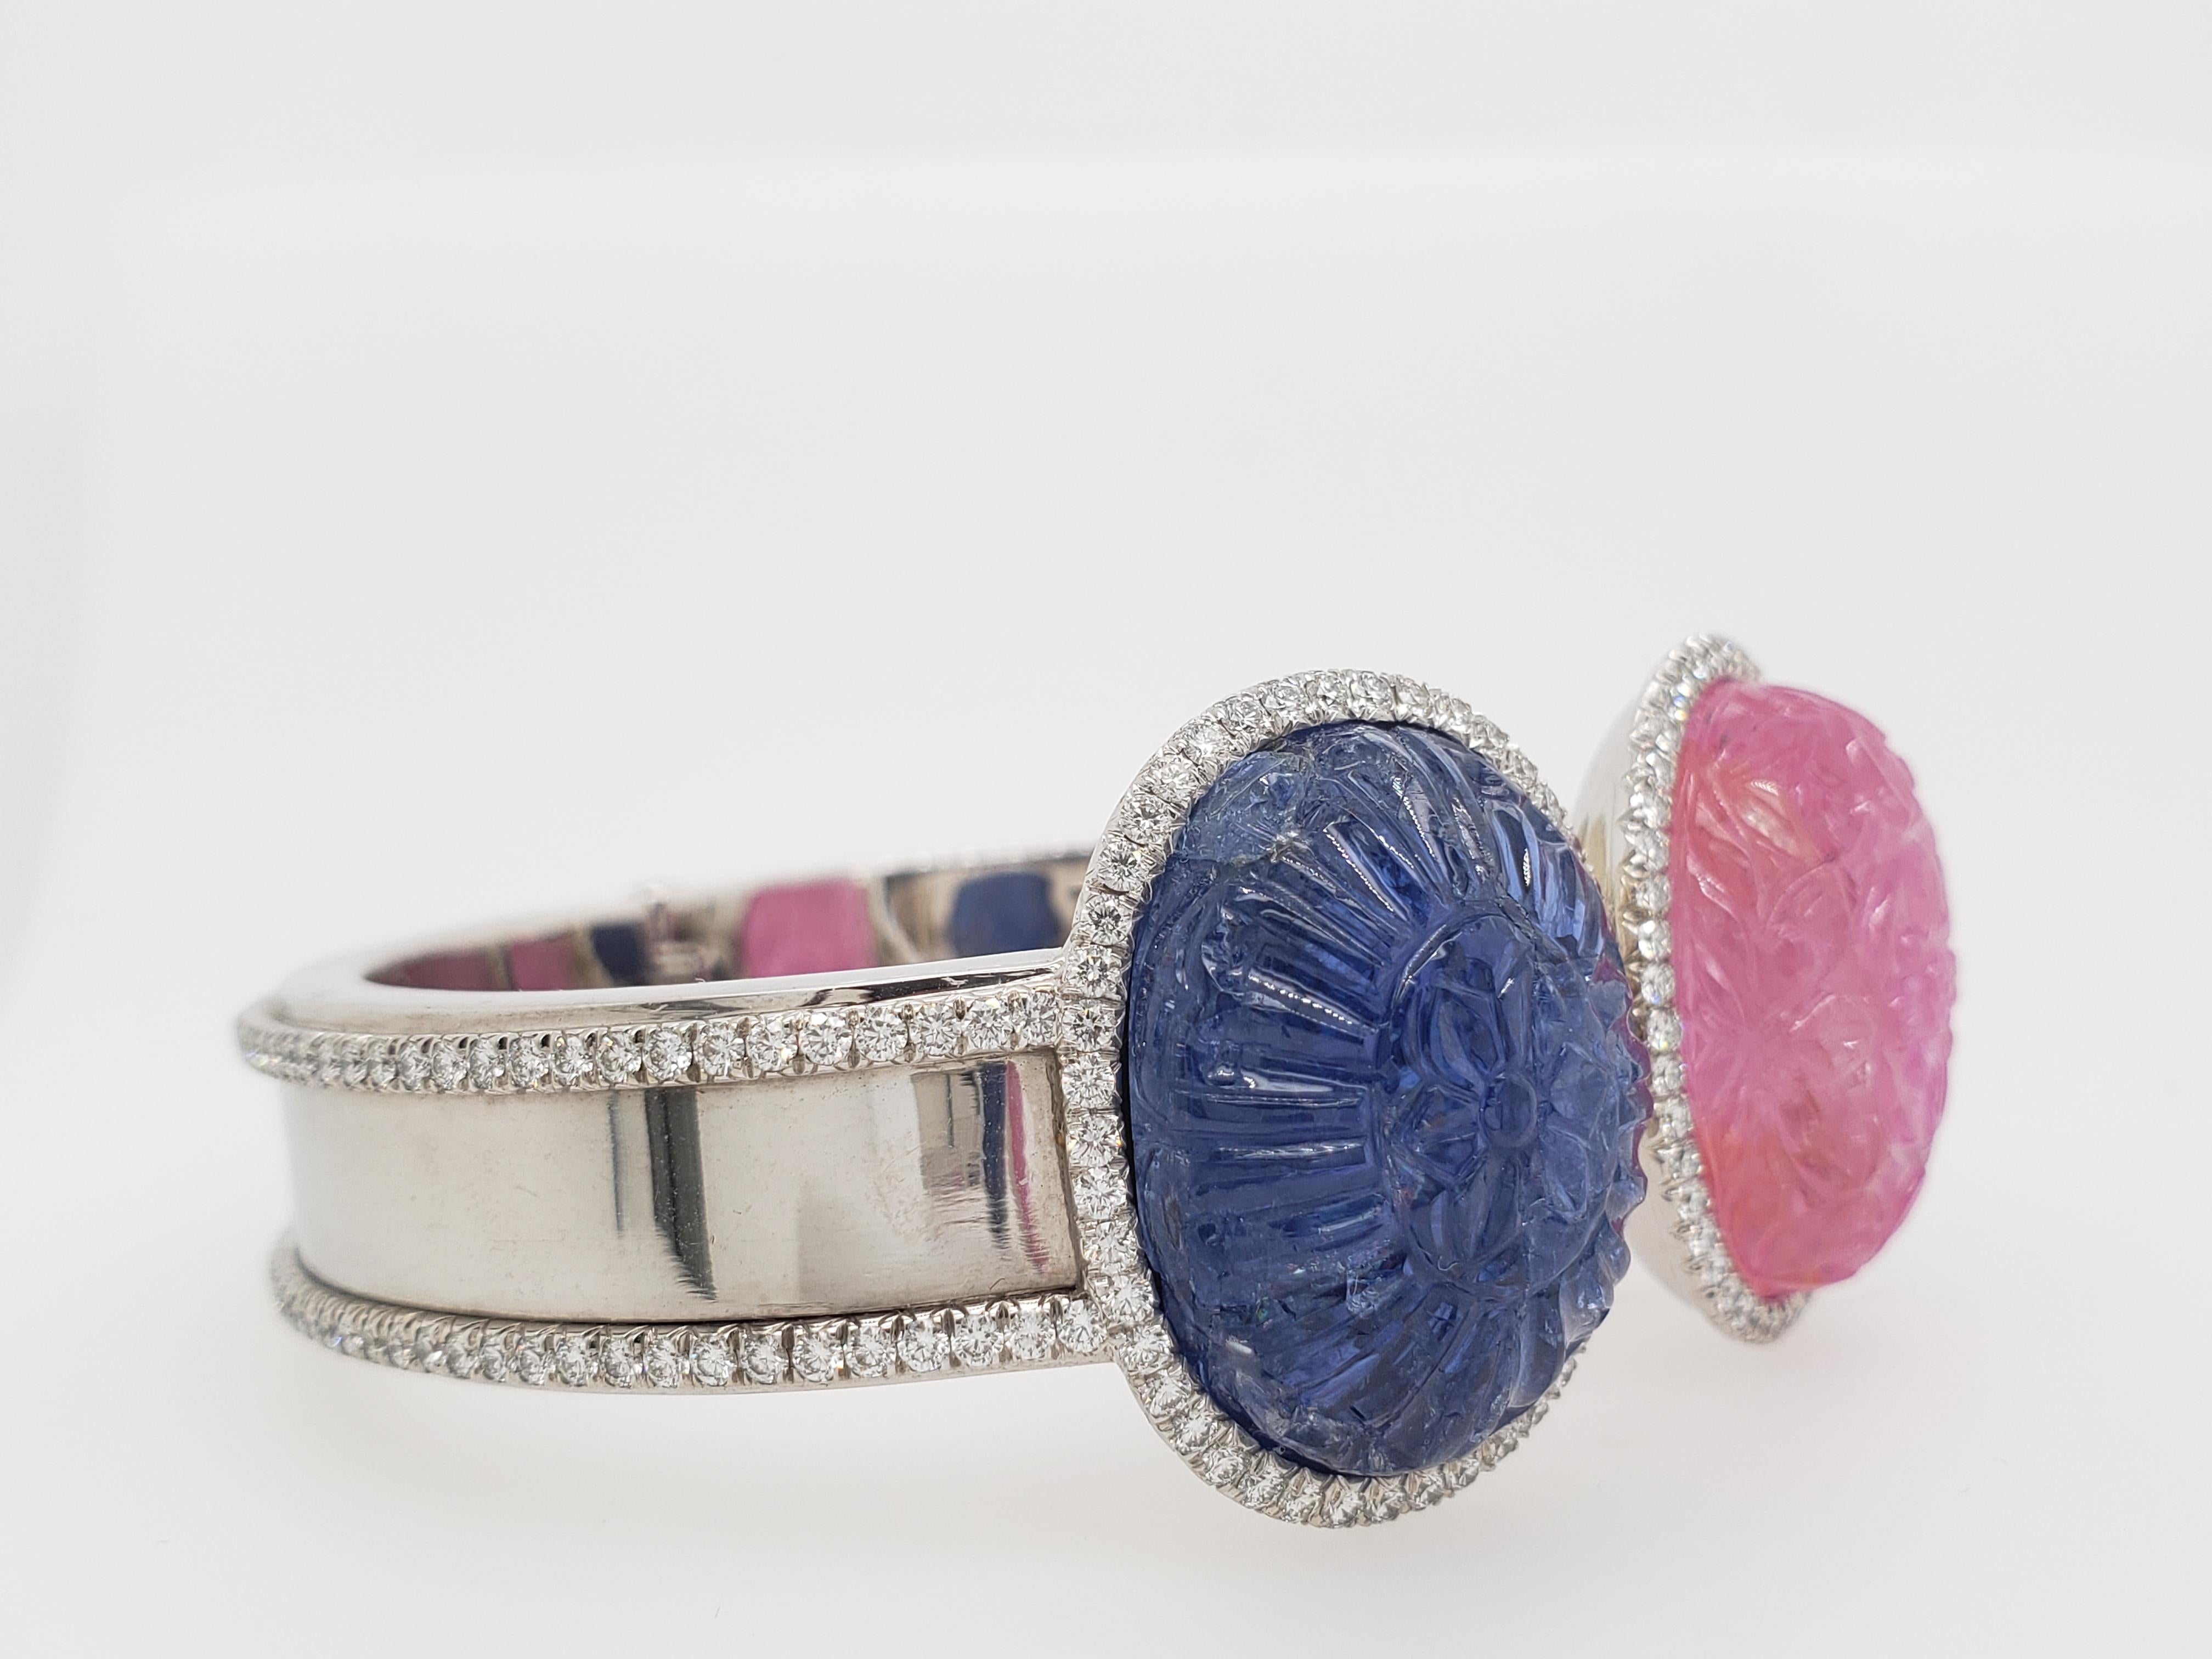 Oval Cut Burma Sapphire and Ruby Hand Carved with Diamond Bracelet Cuff 'Bangle' For Sale